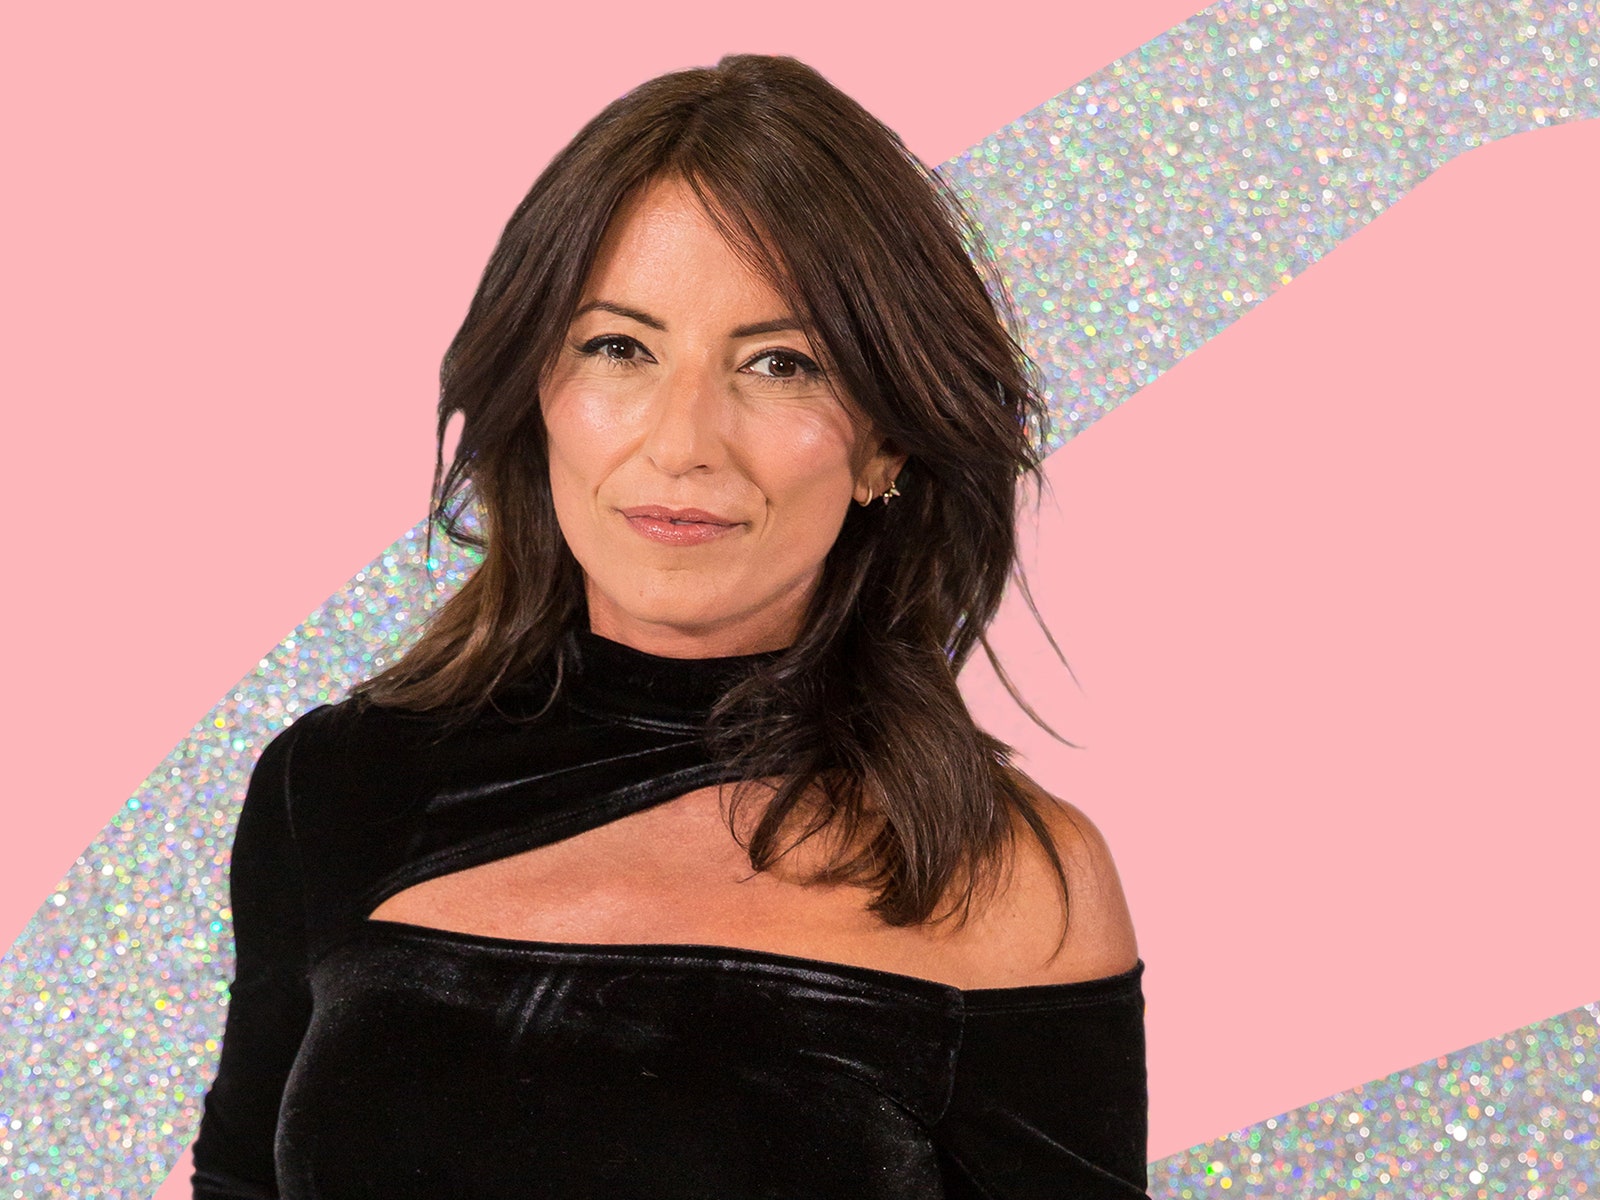 Davina McCall got candid about her heroin addiction and how sobriety changed her life in this incredibly inspiring interview